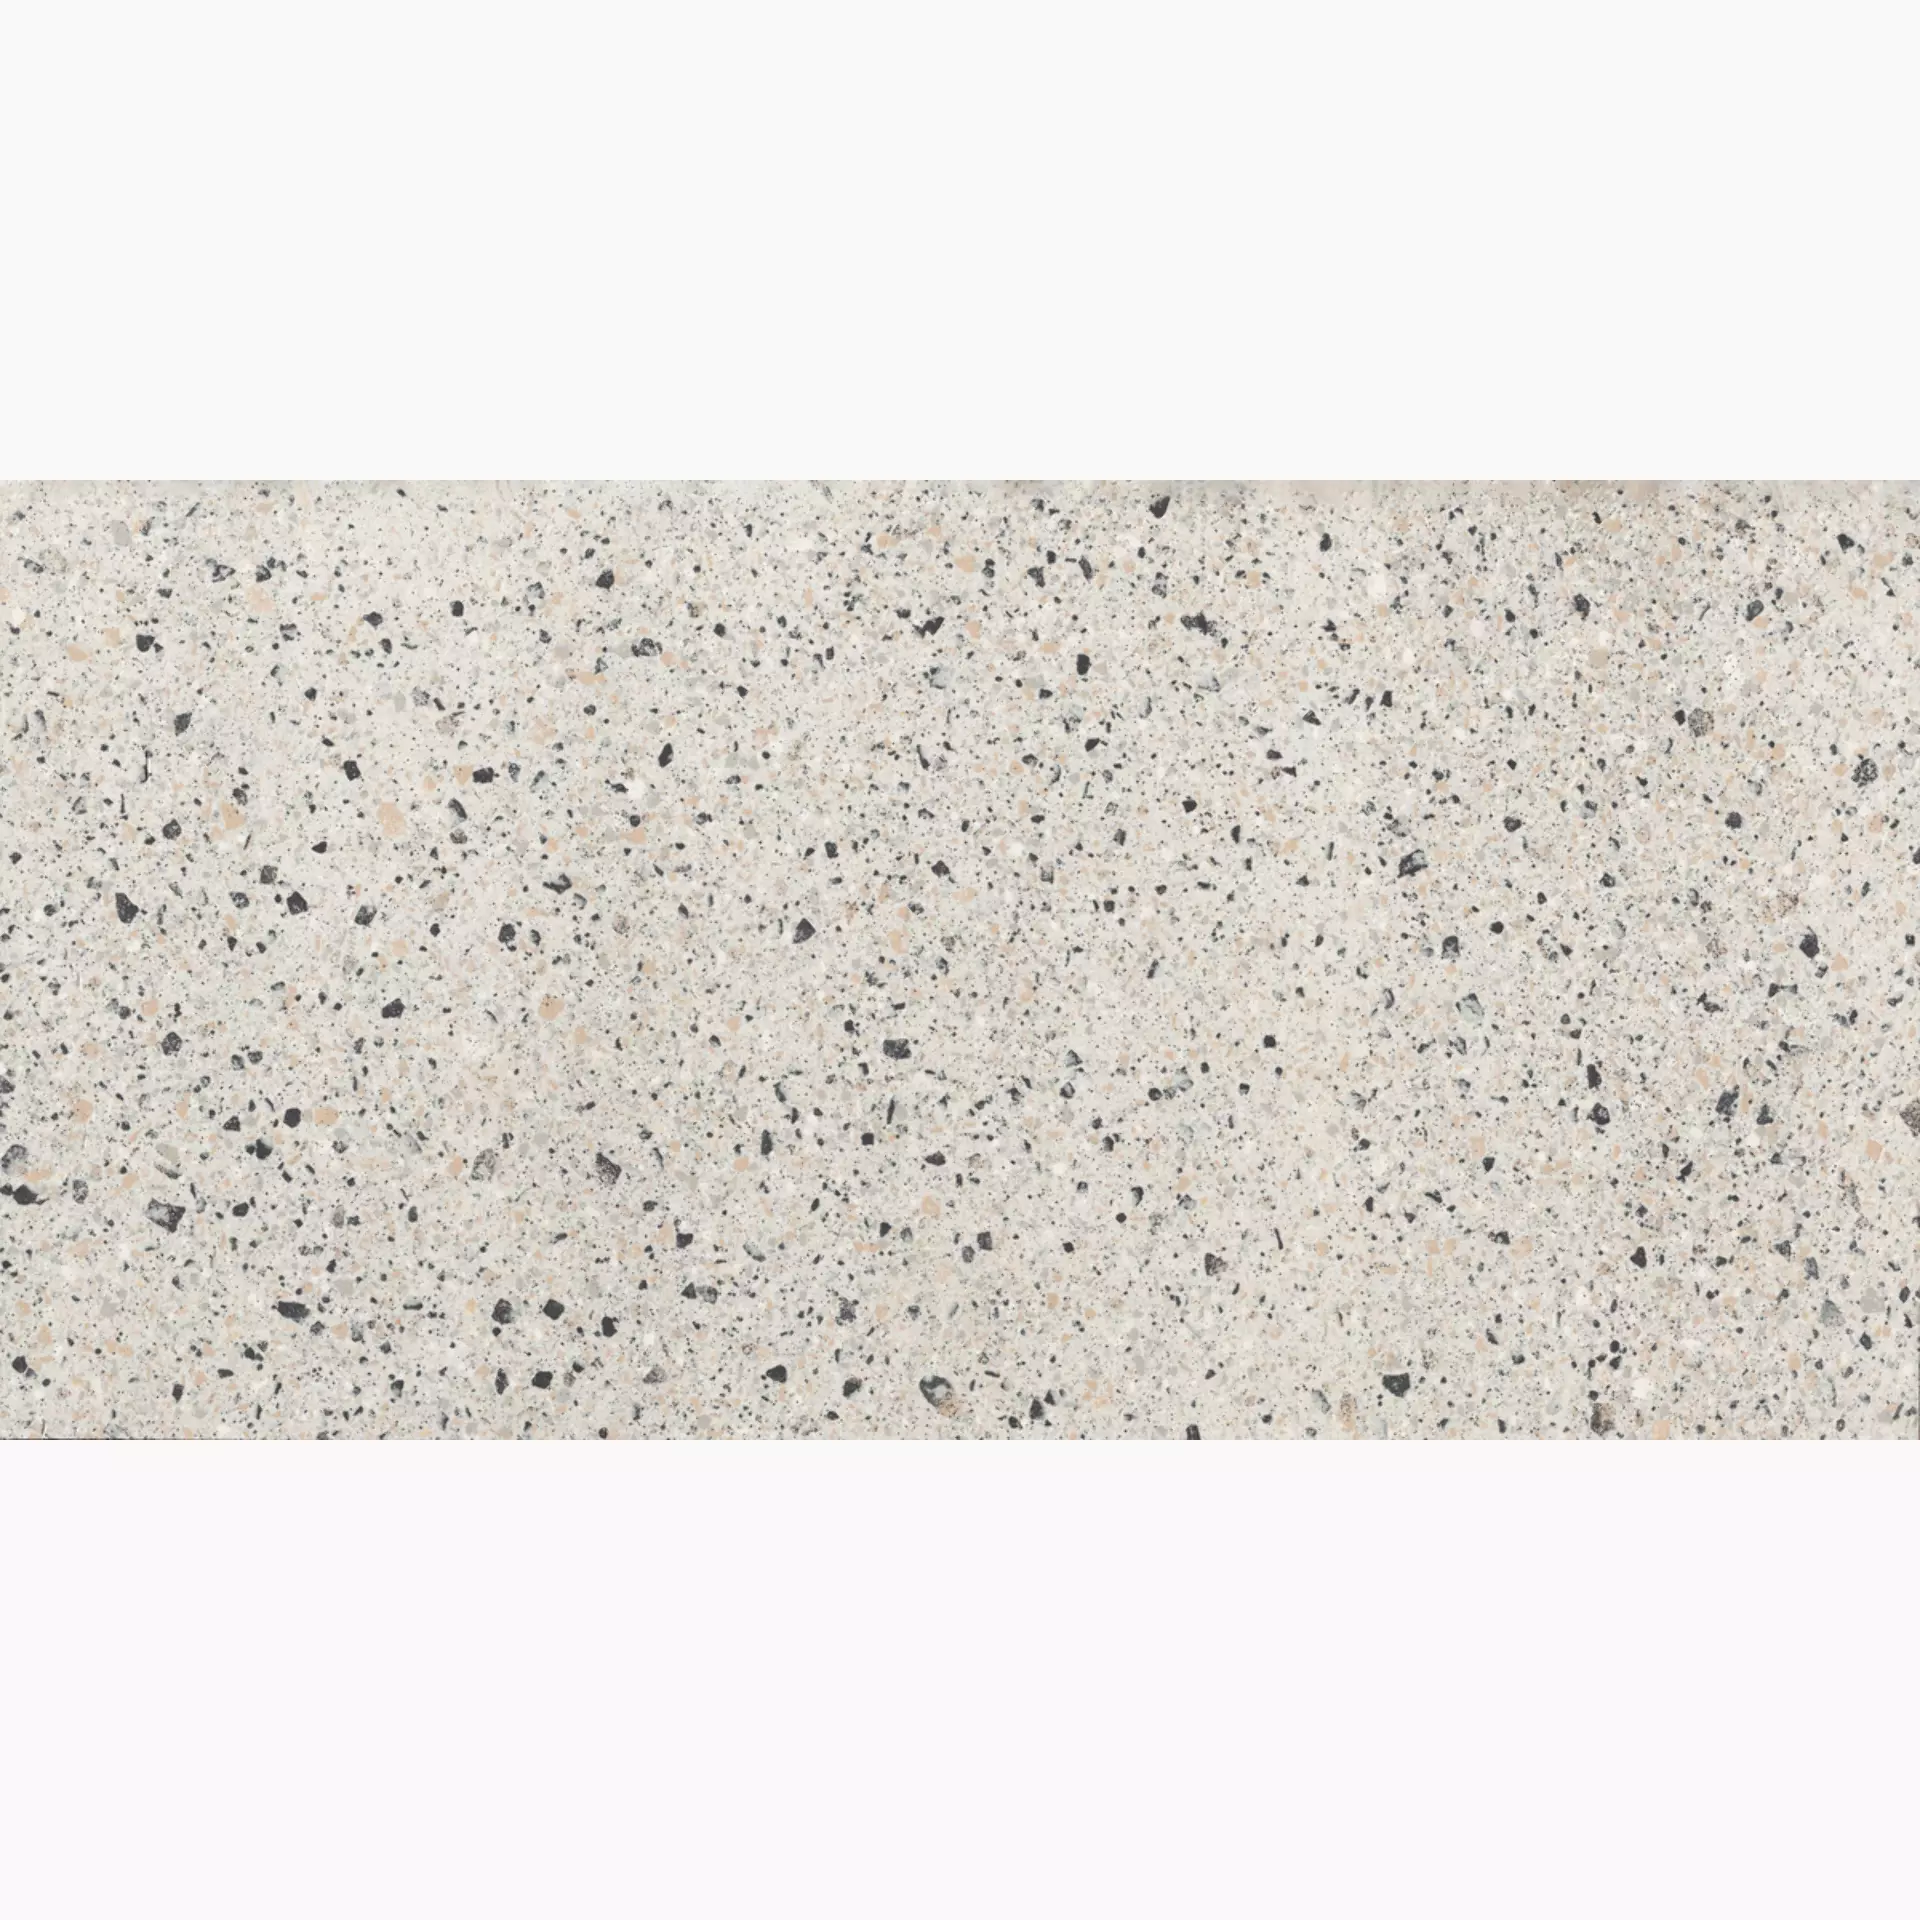 FMG Rialto Pink Naturale P62427 60x120cm rectified 10mm